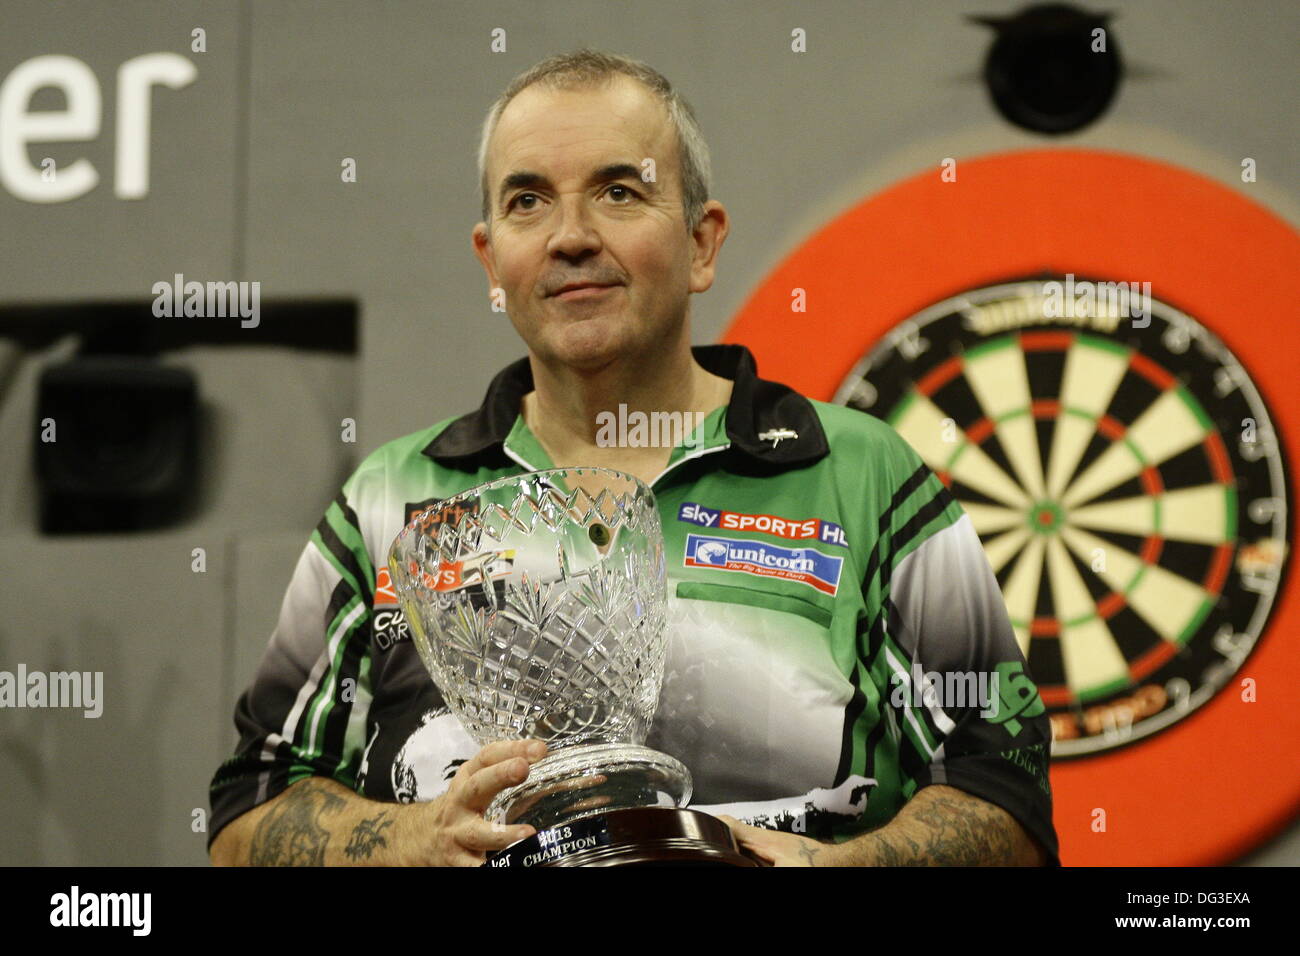 Dublin, UK. 13th Oct, 2013. PDC Party Poker World Grand Prix Darts -The  Final: Phil Taylor wins his 11th World Grand Prix title over Dave Chisnall  by 6 sets to 0 at